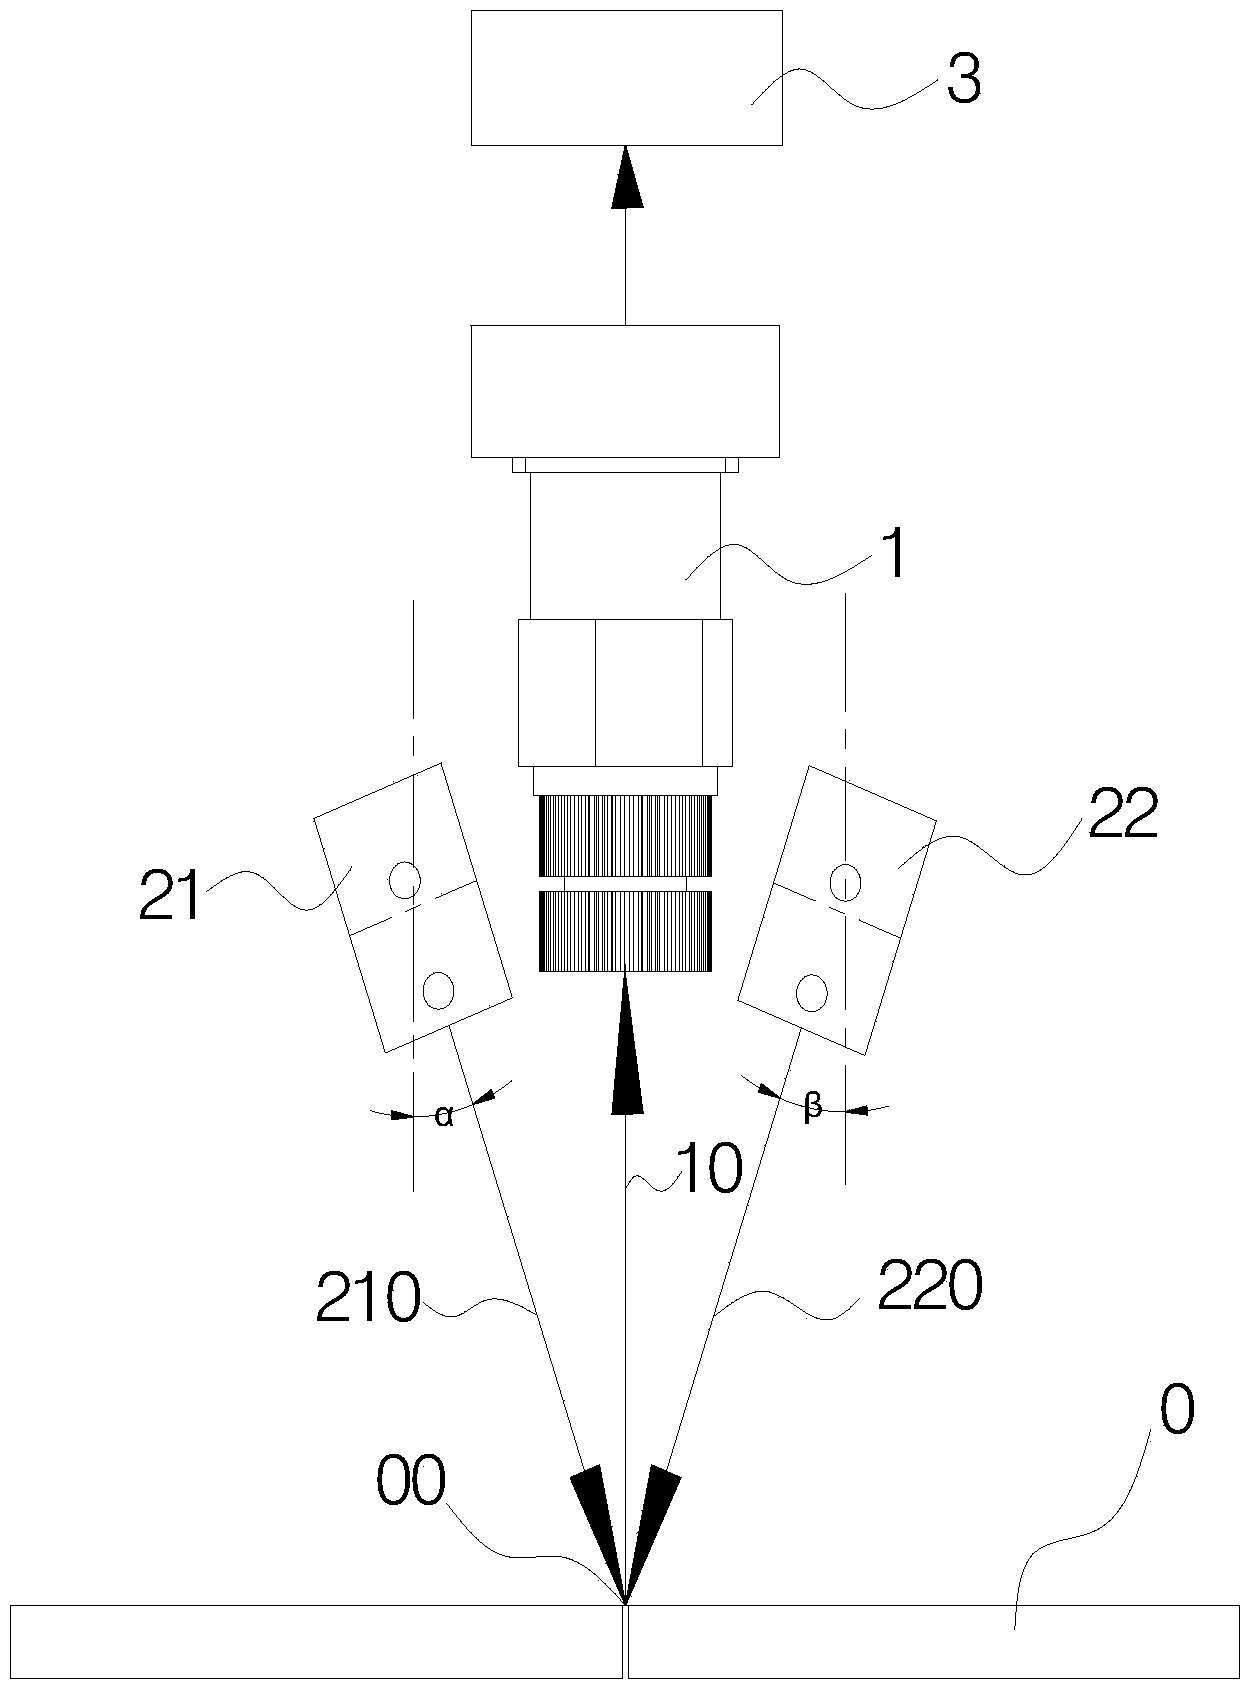 Plain butt weld detection system based on dual-path converged adjustable light path